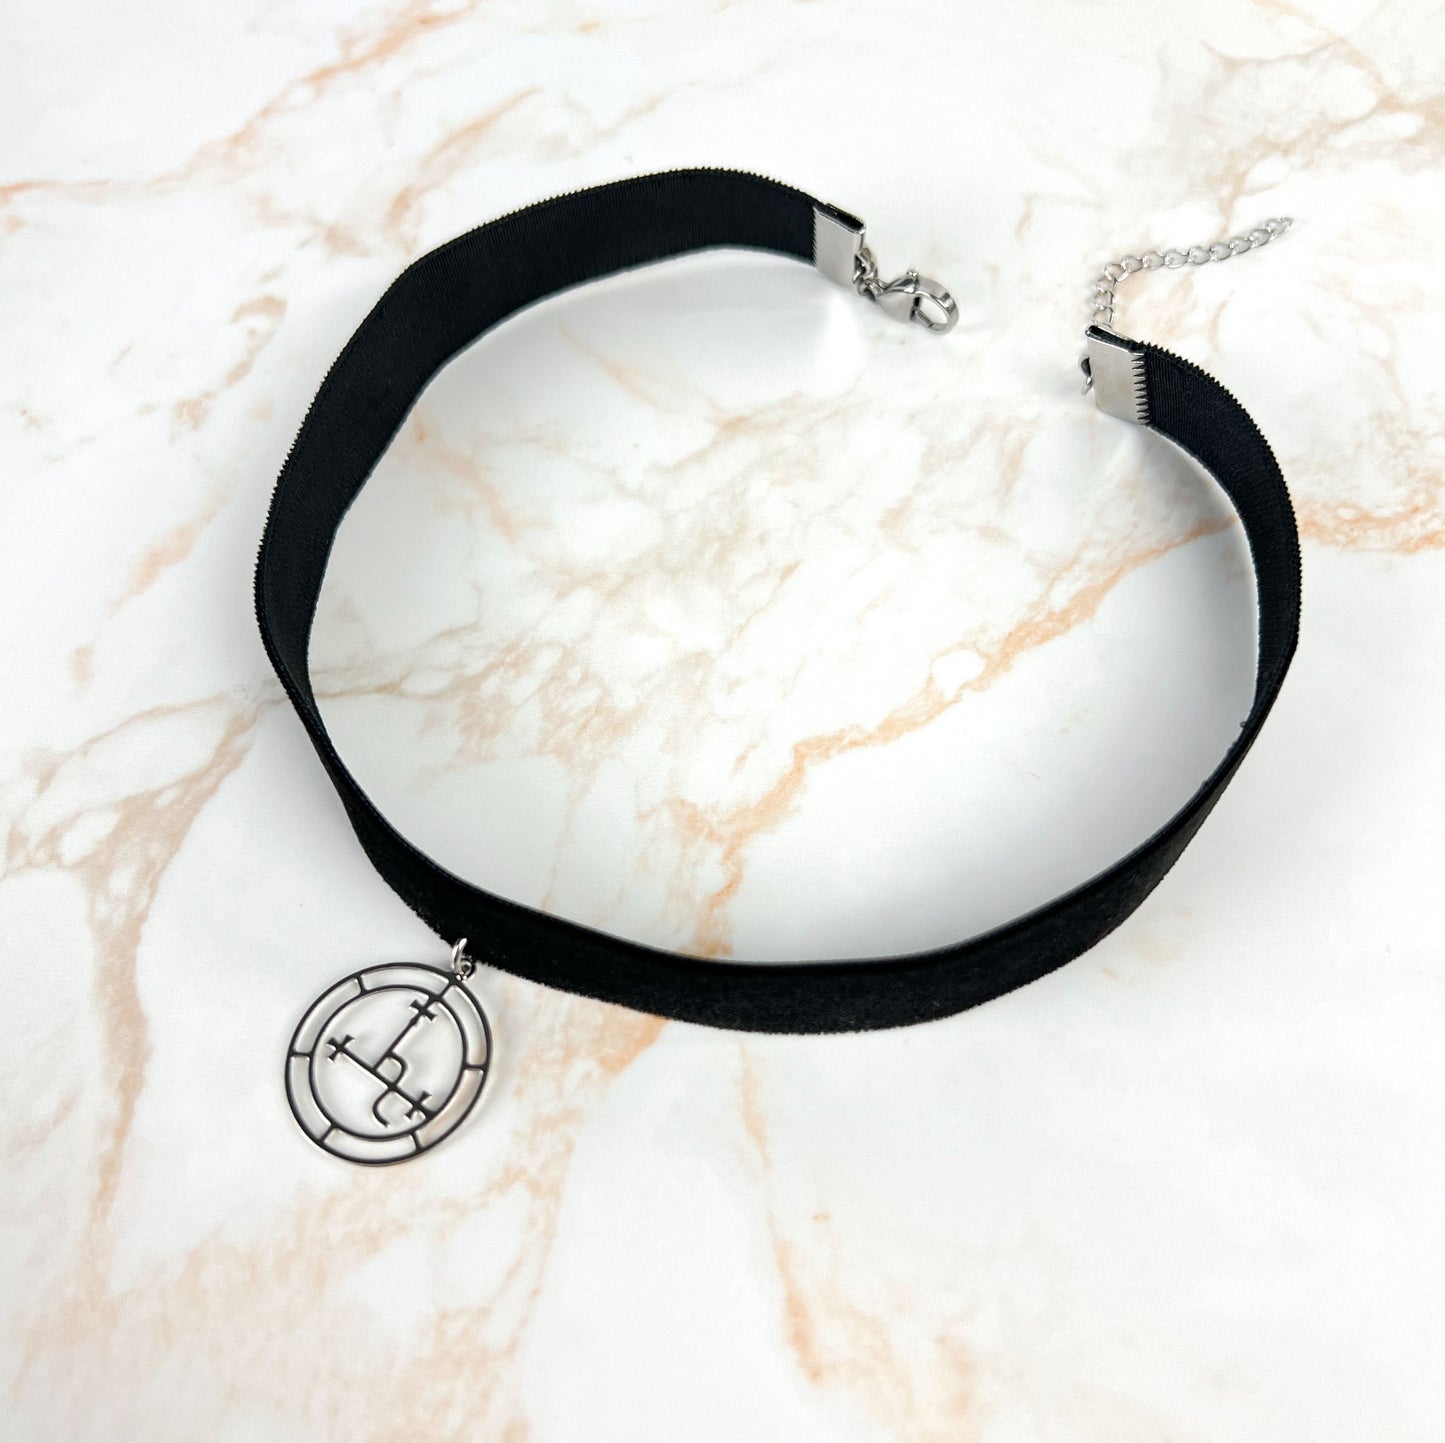 Black velvet Lilith sigil occult gothic choker, stainless steel - The French Witch shop